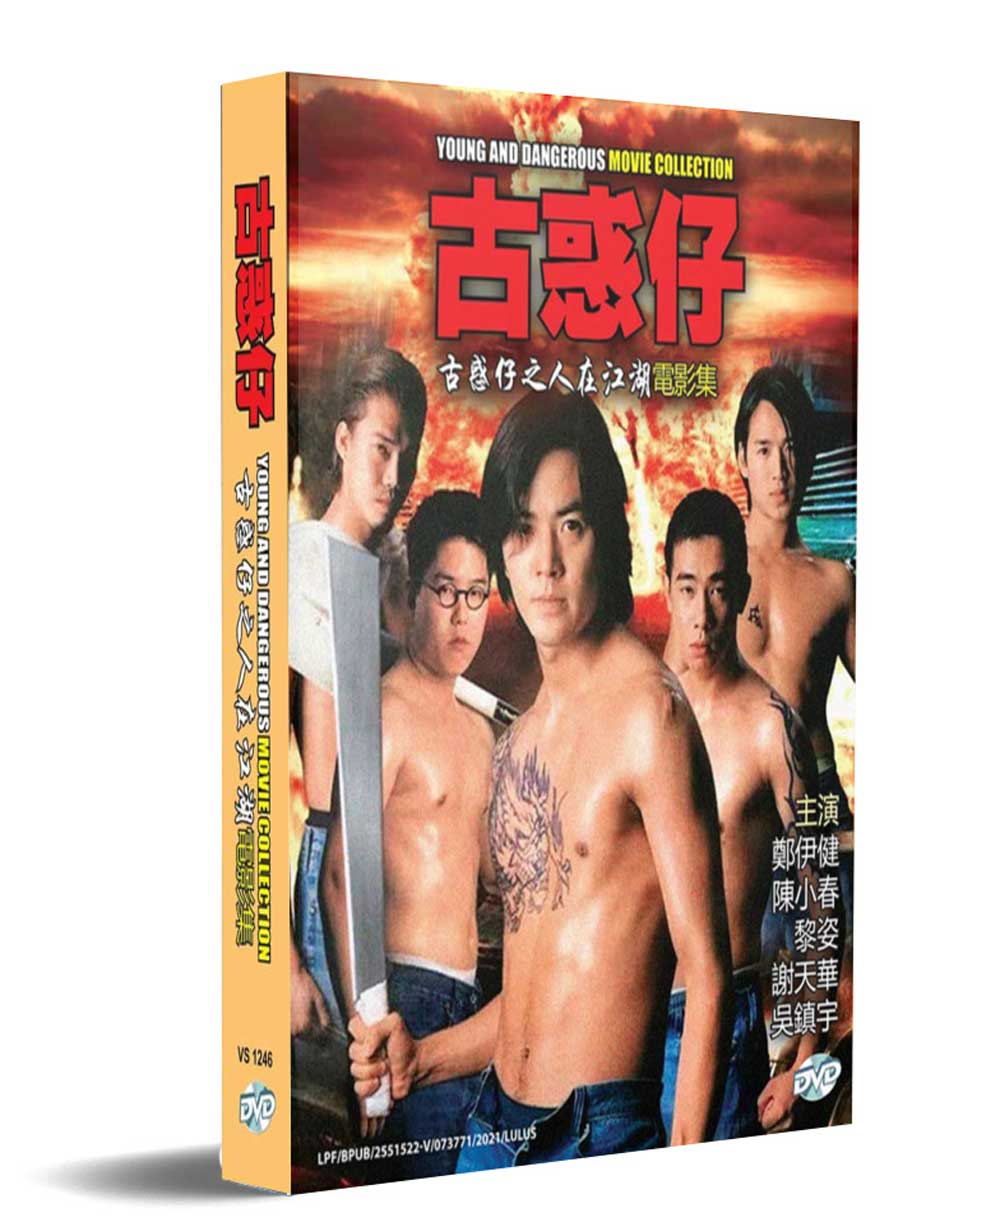 Young and Dangerous Movie Collection (DVD) (1996–2000) 香港映画